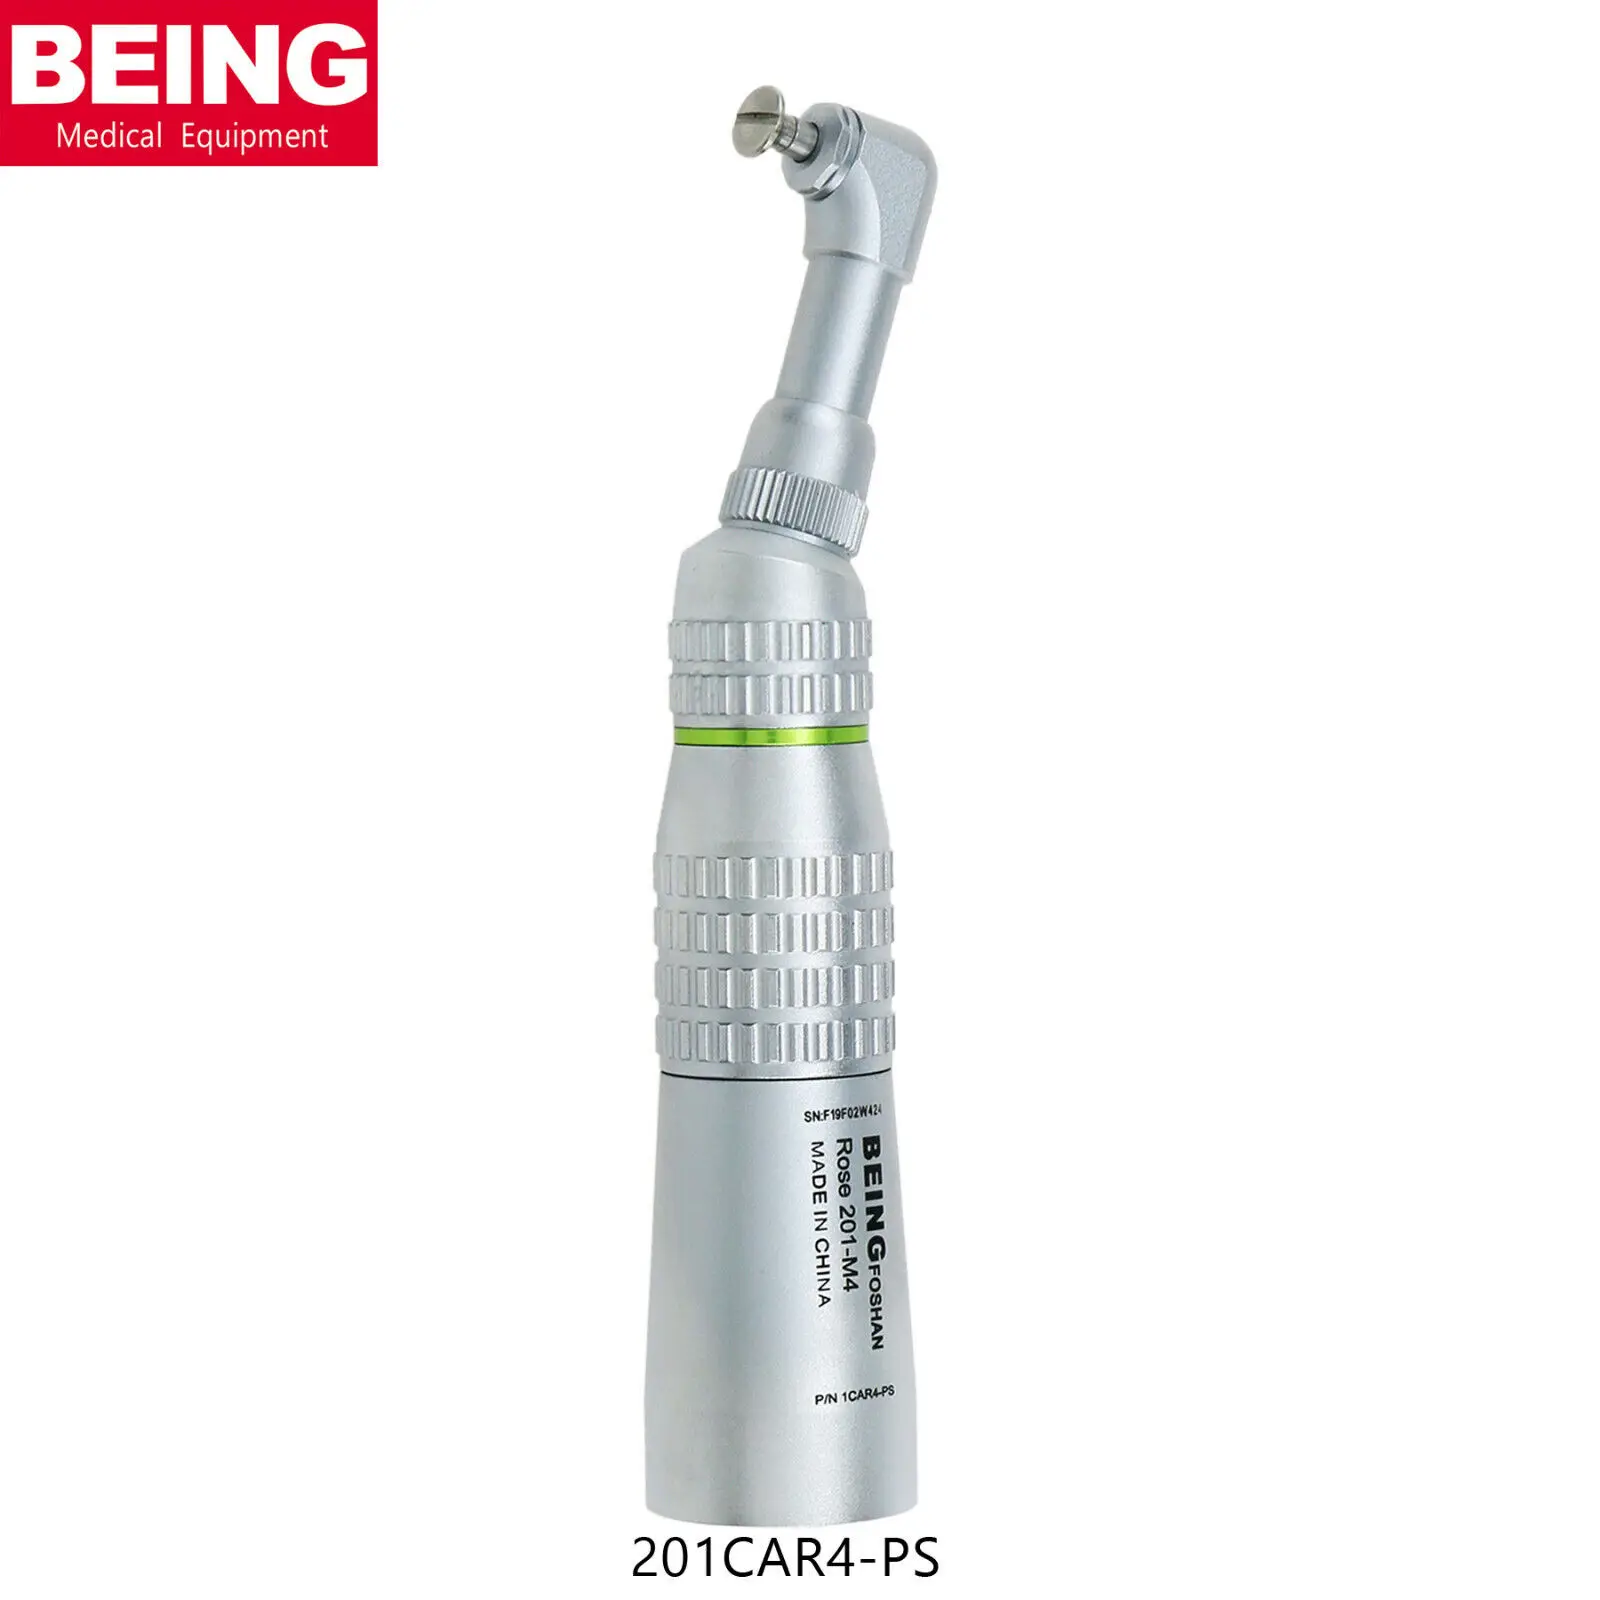 BEING Dental Prophy Contra Angle Polisher Handpiece Reduction 4:1 Screw In Head Fits All E-type ISO Standard Motors